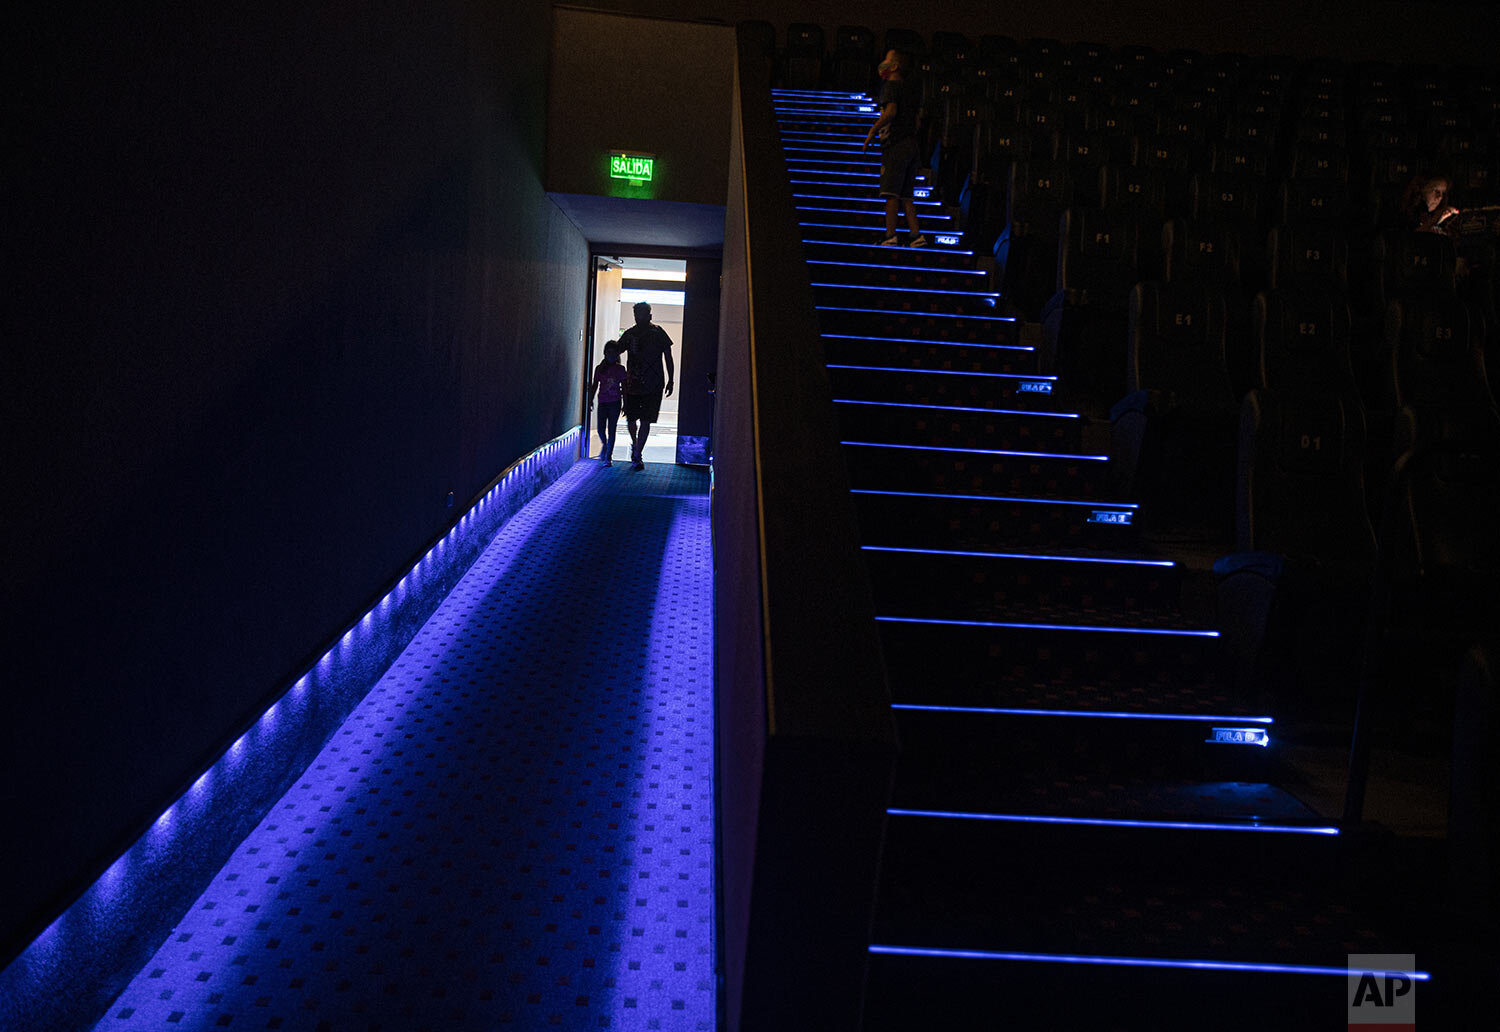  Movie goers enter a Cinepolis cinema on the first day after the COVID-19 lockdown in Santiago, Chile, Feb. 18, 2021. (AP Photo/Esteban Felix) 